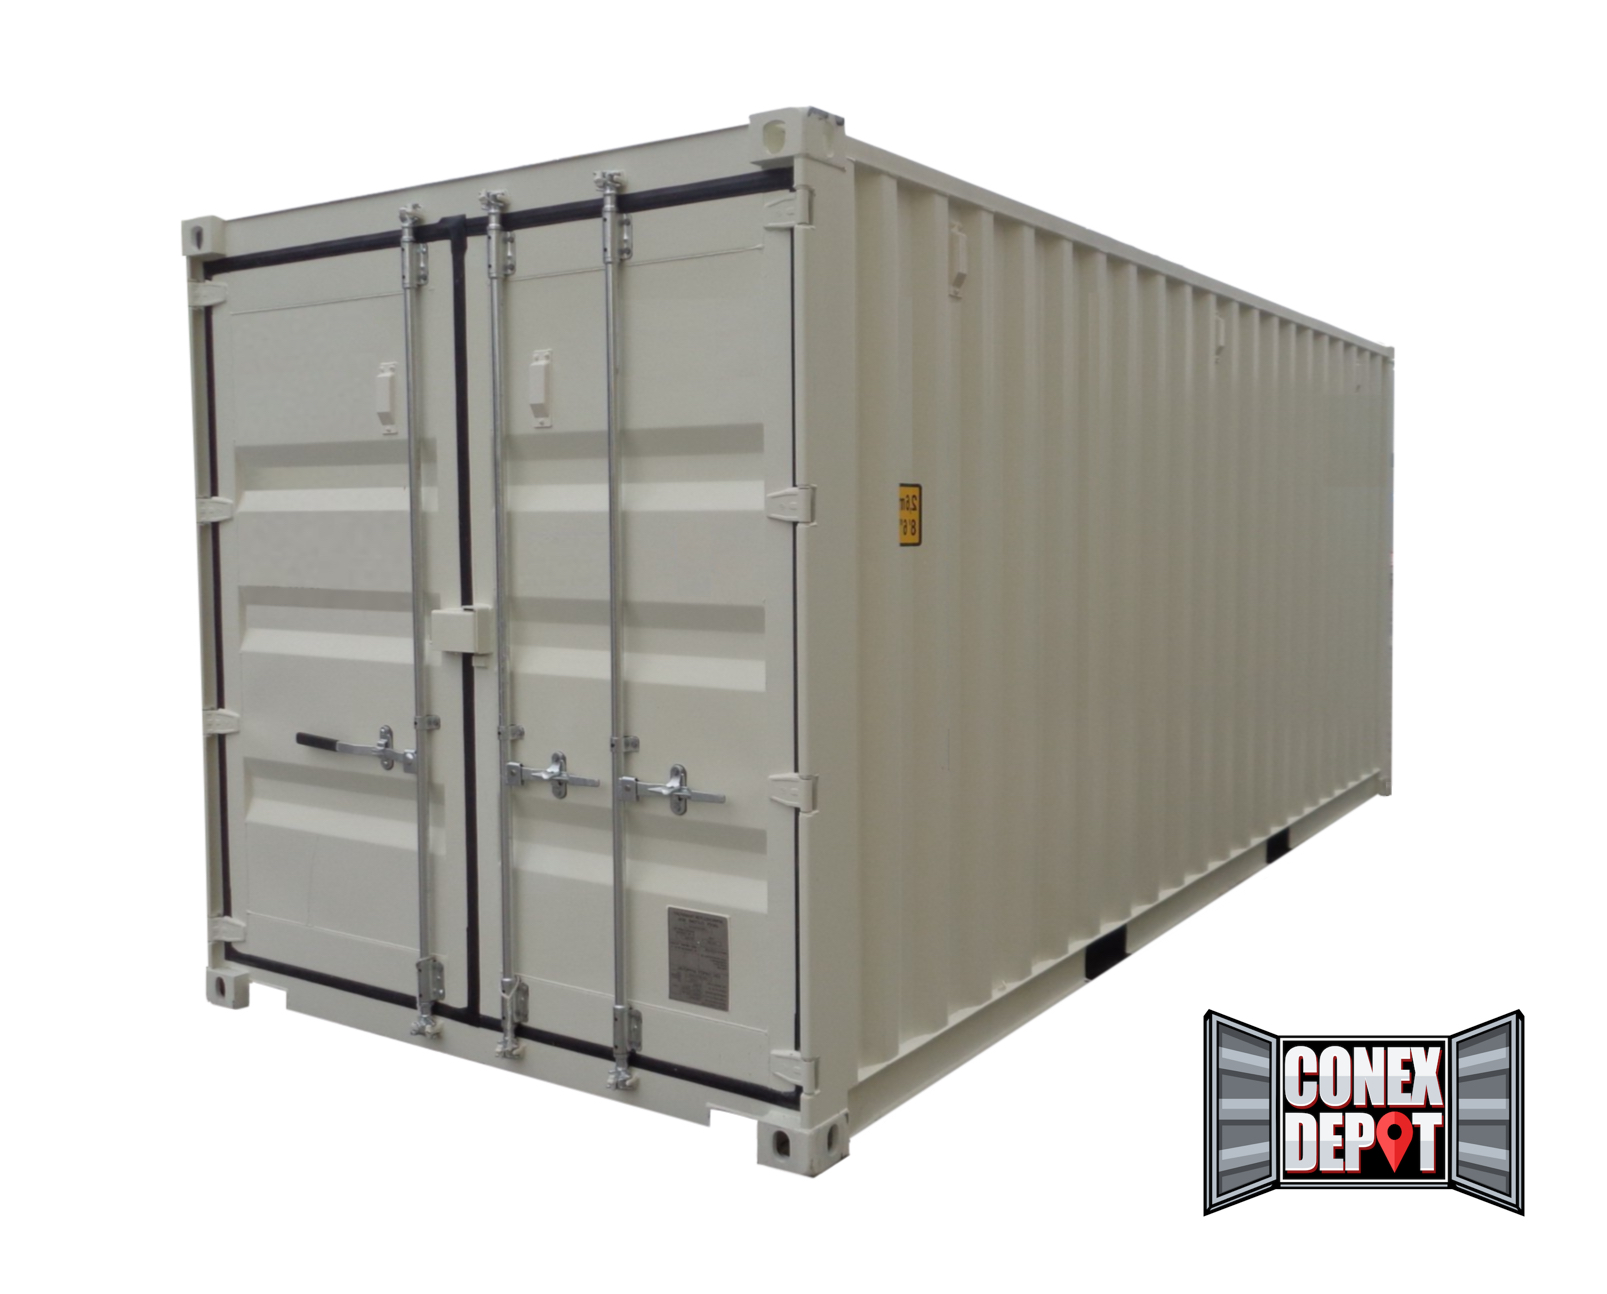 One Trip New 20' shipping container for sale in Salt Lake CIty Utah 